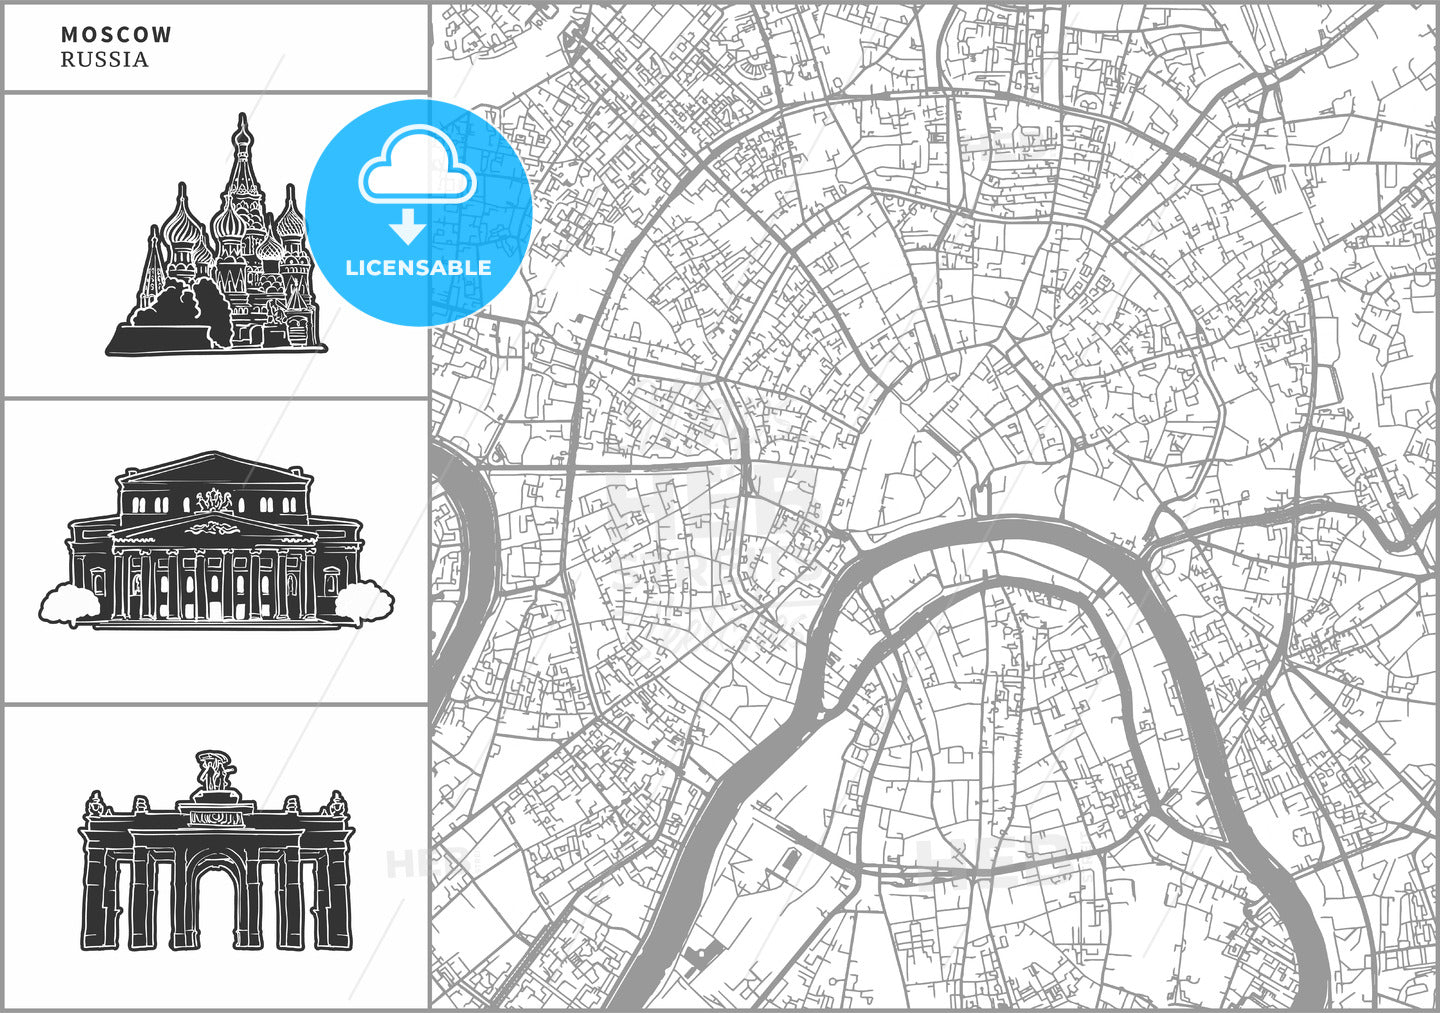 Moscow city map with hand-drawn architecture icons